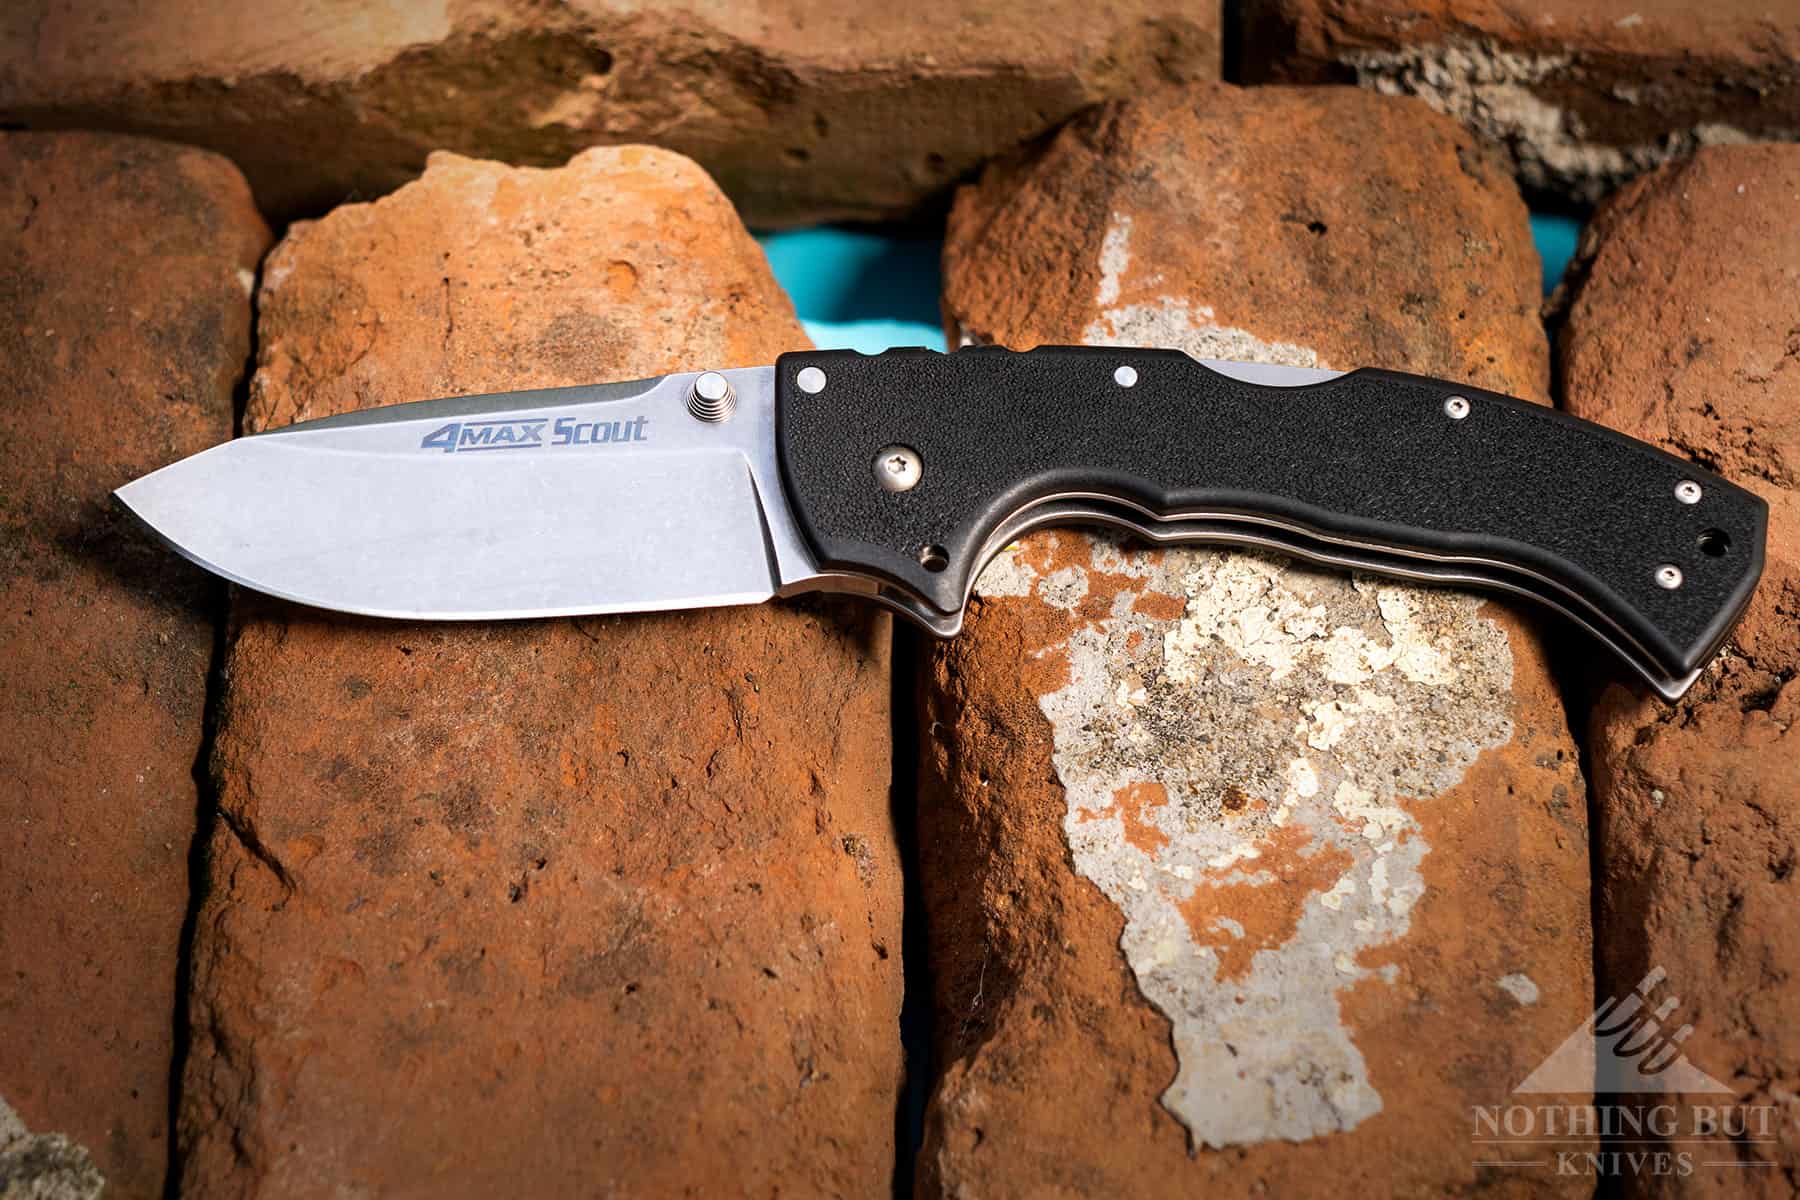 10 Best EDC Knives Under $50 & $150 [Hands-On Tested] - Pew Pew